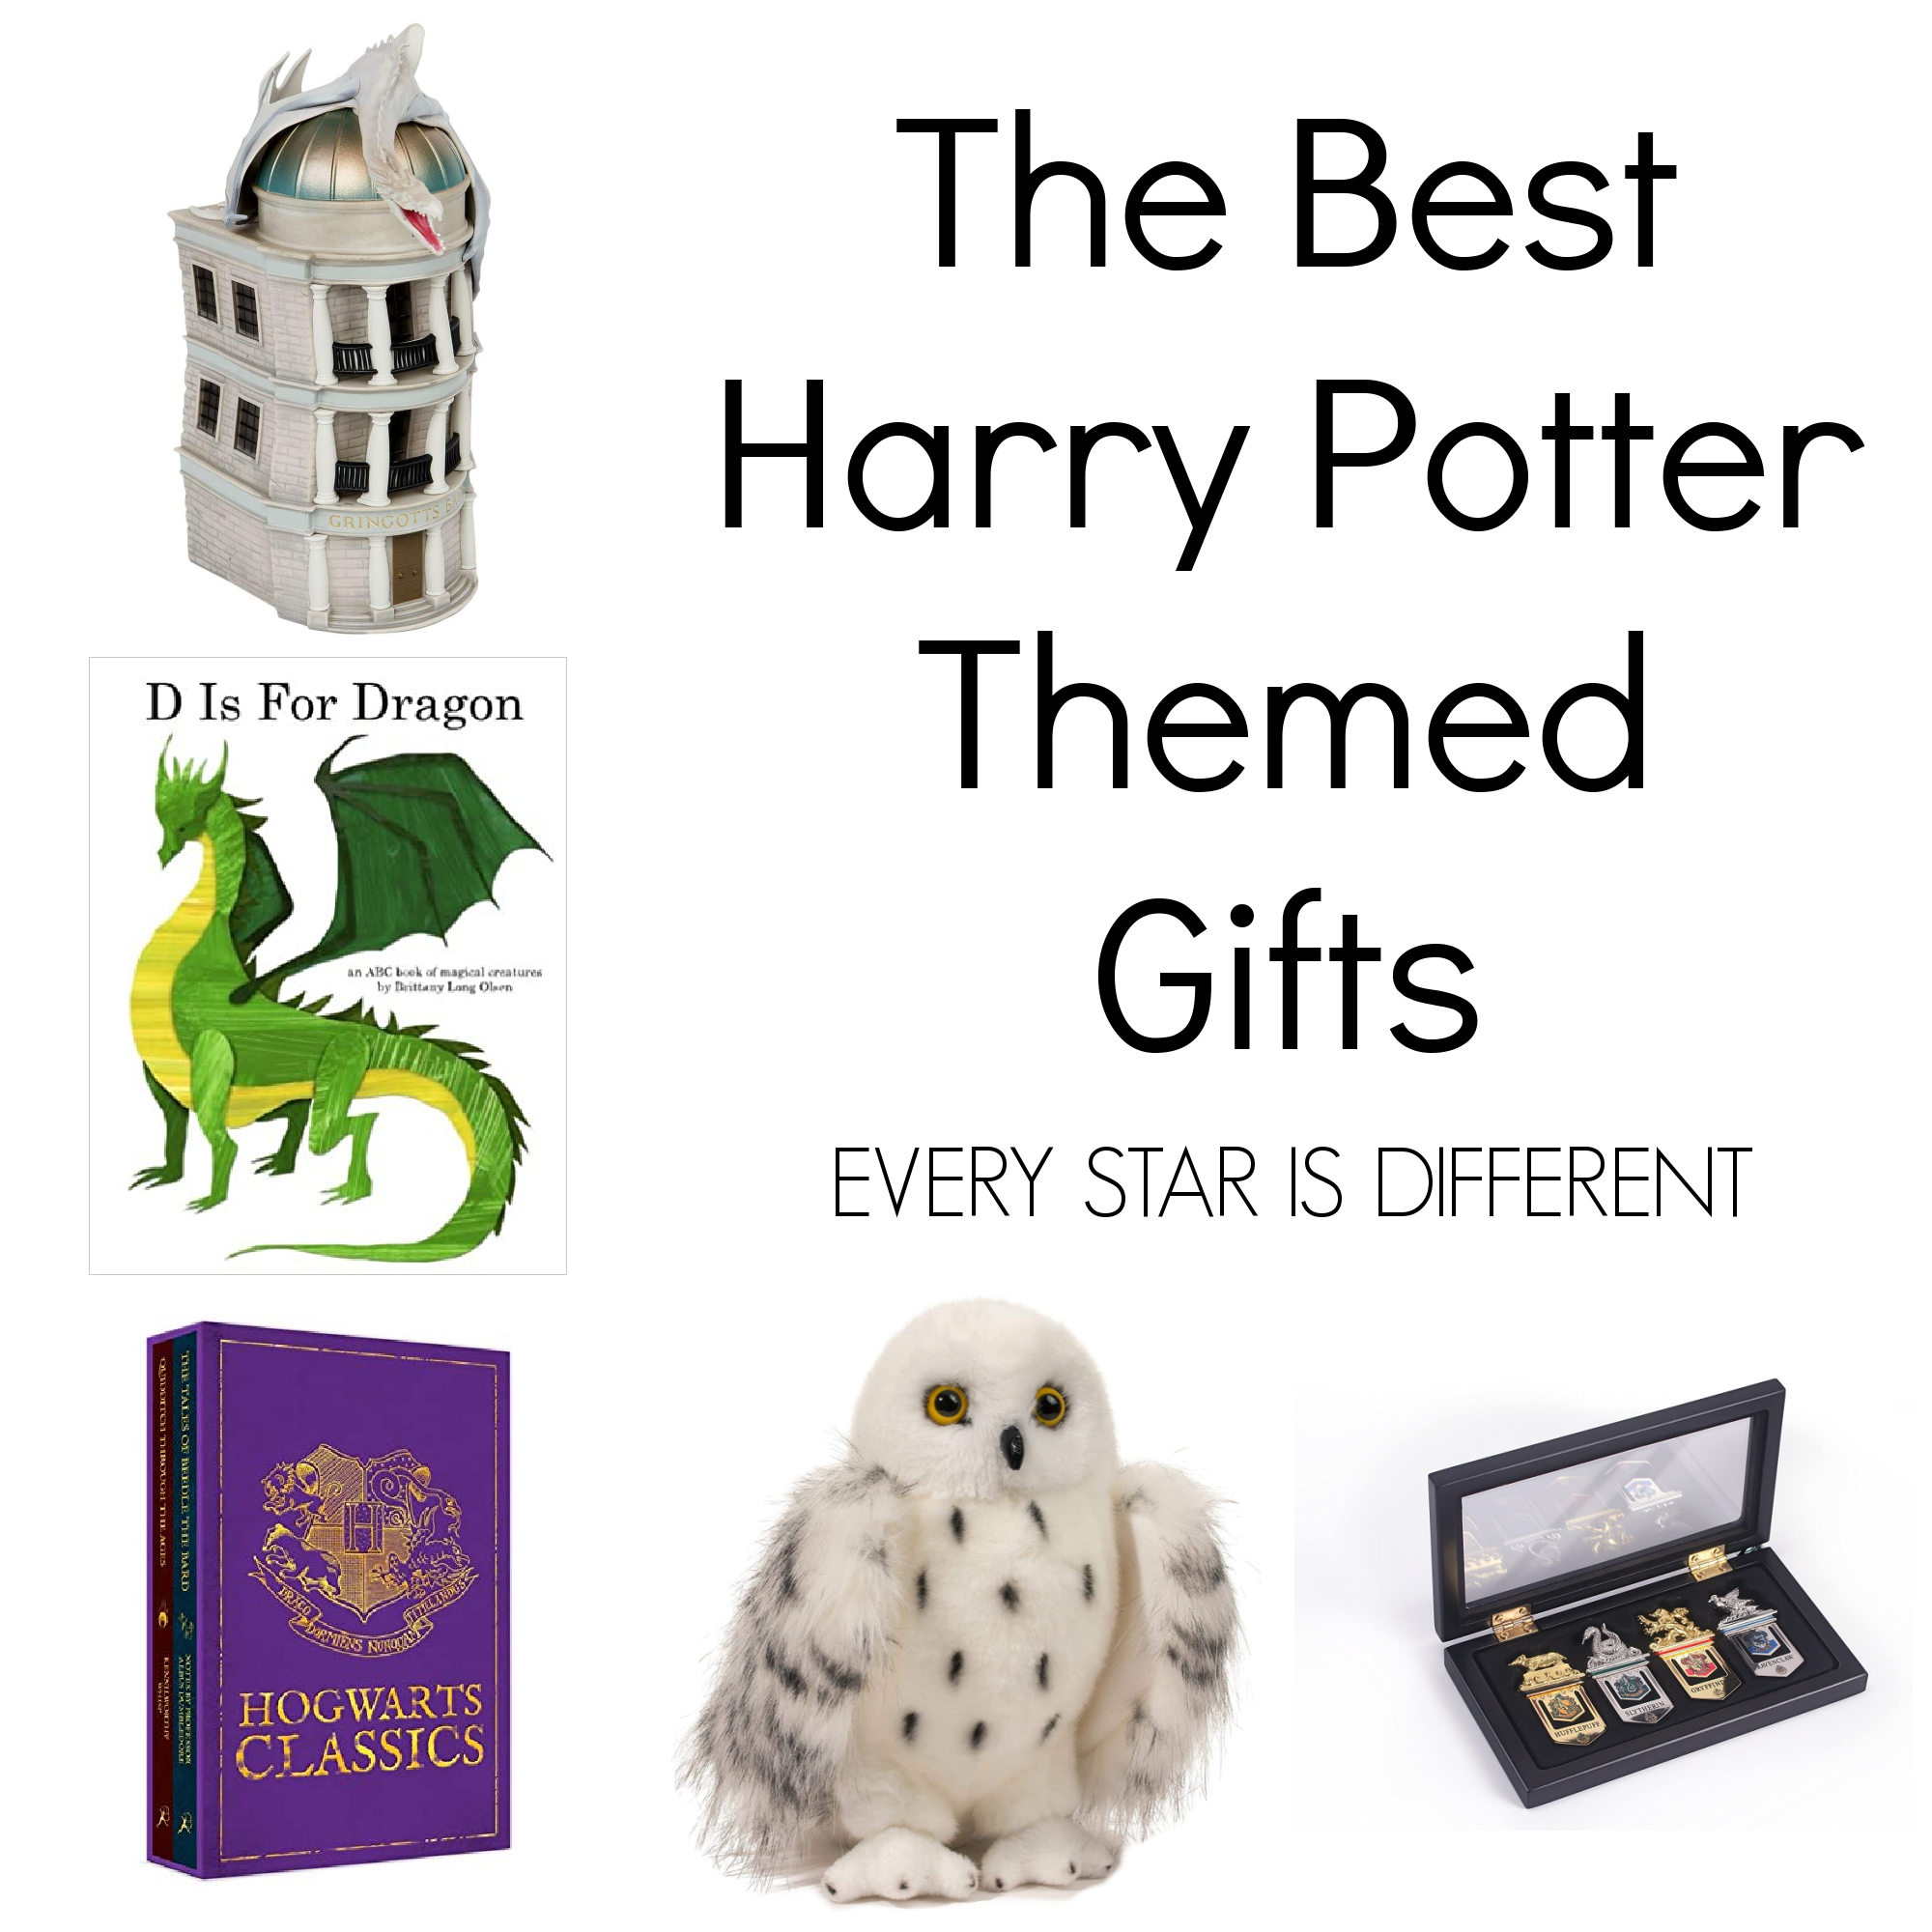 The Best Harry Potter Themed Gifts